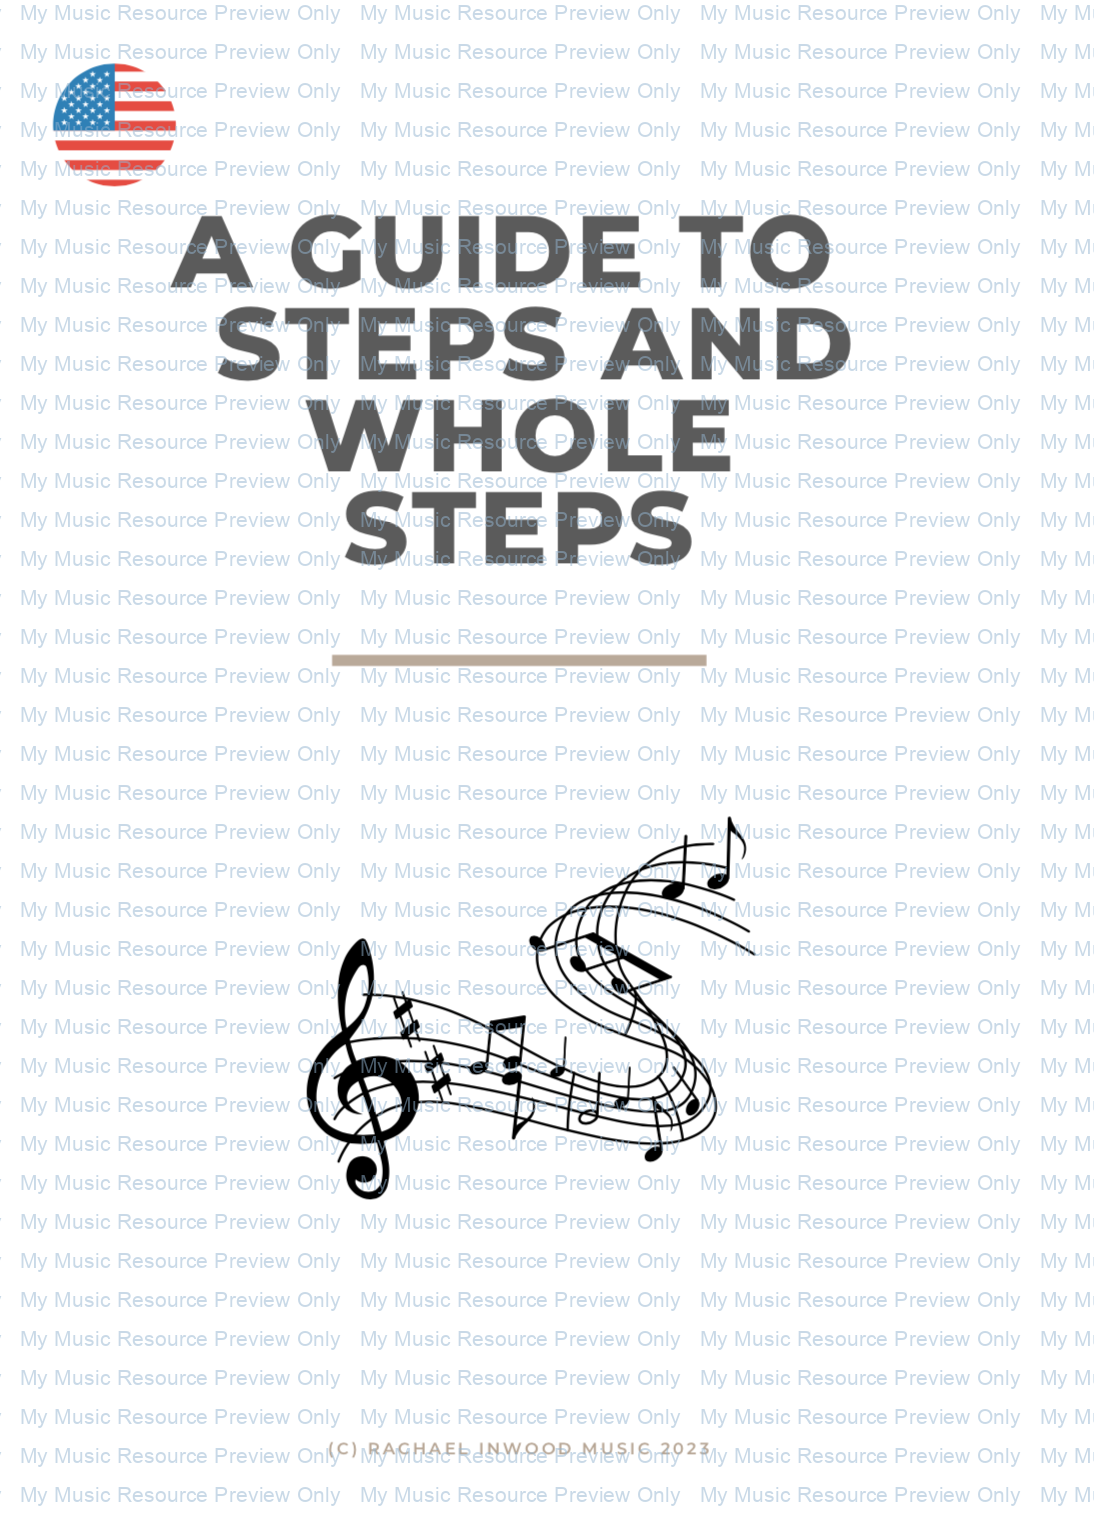 A Guide To Whole-Steps And Half-Steps (US)